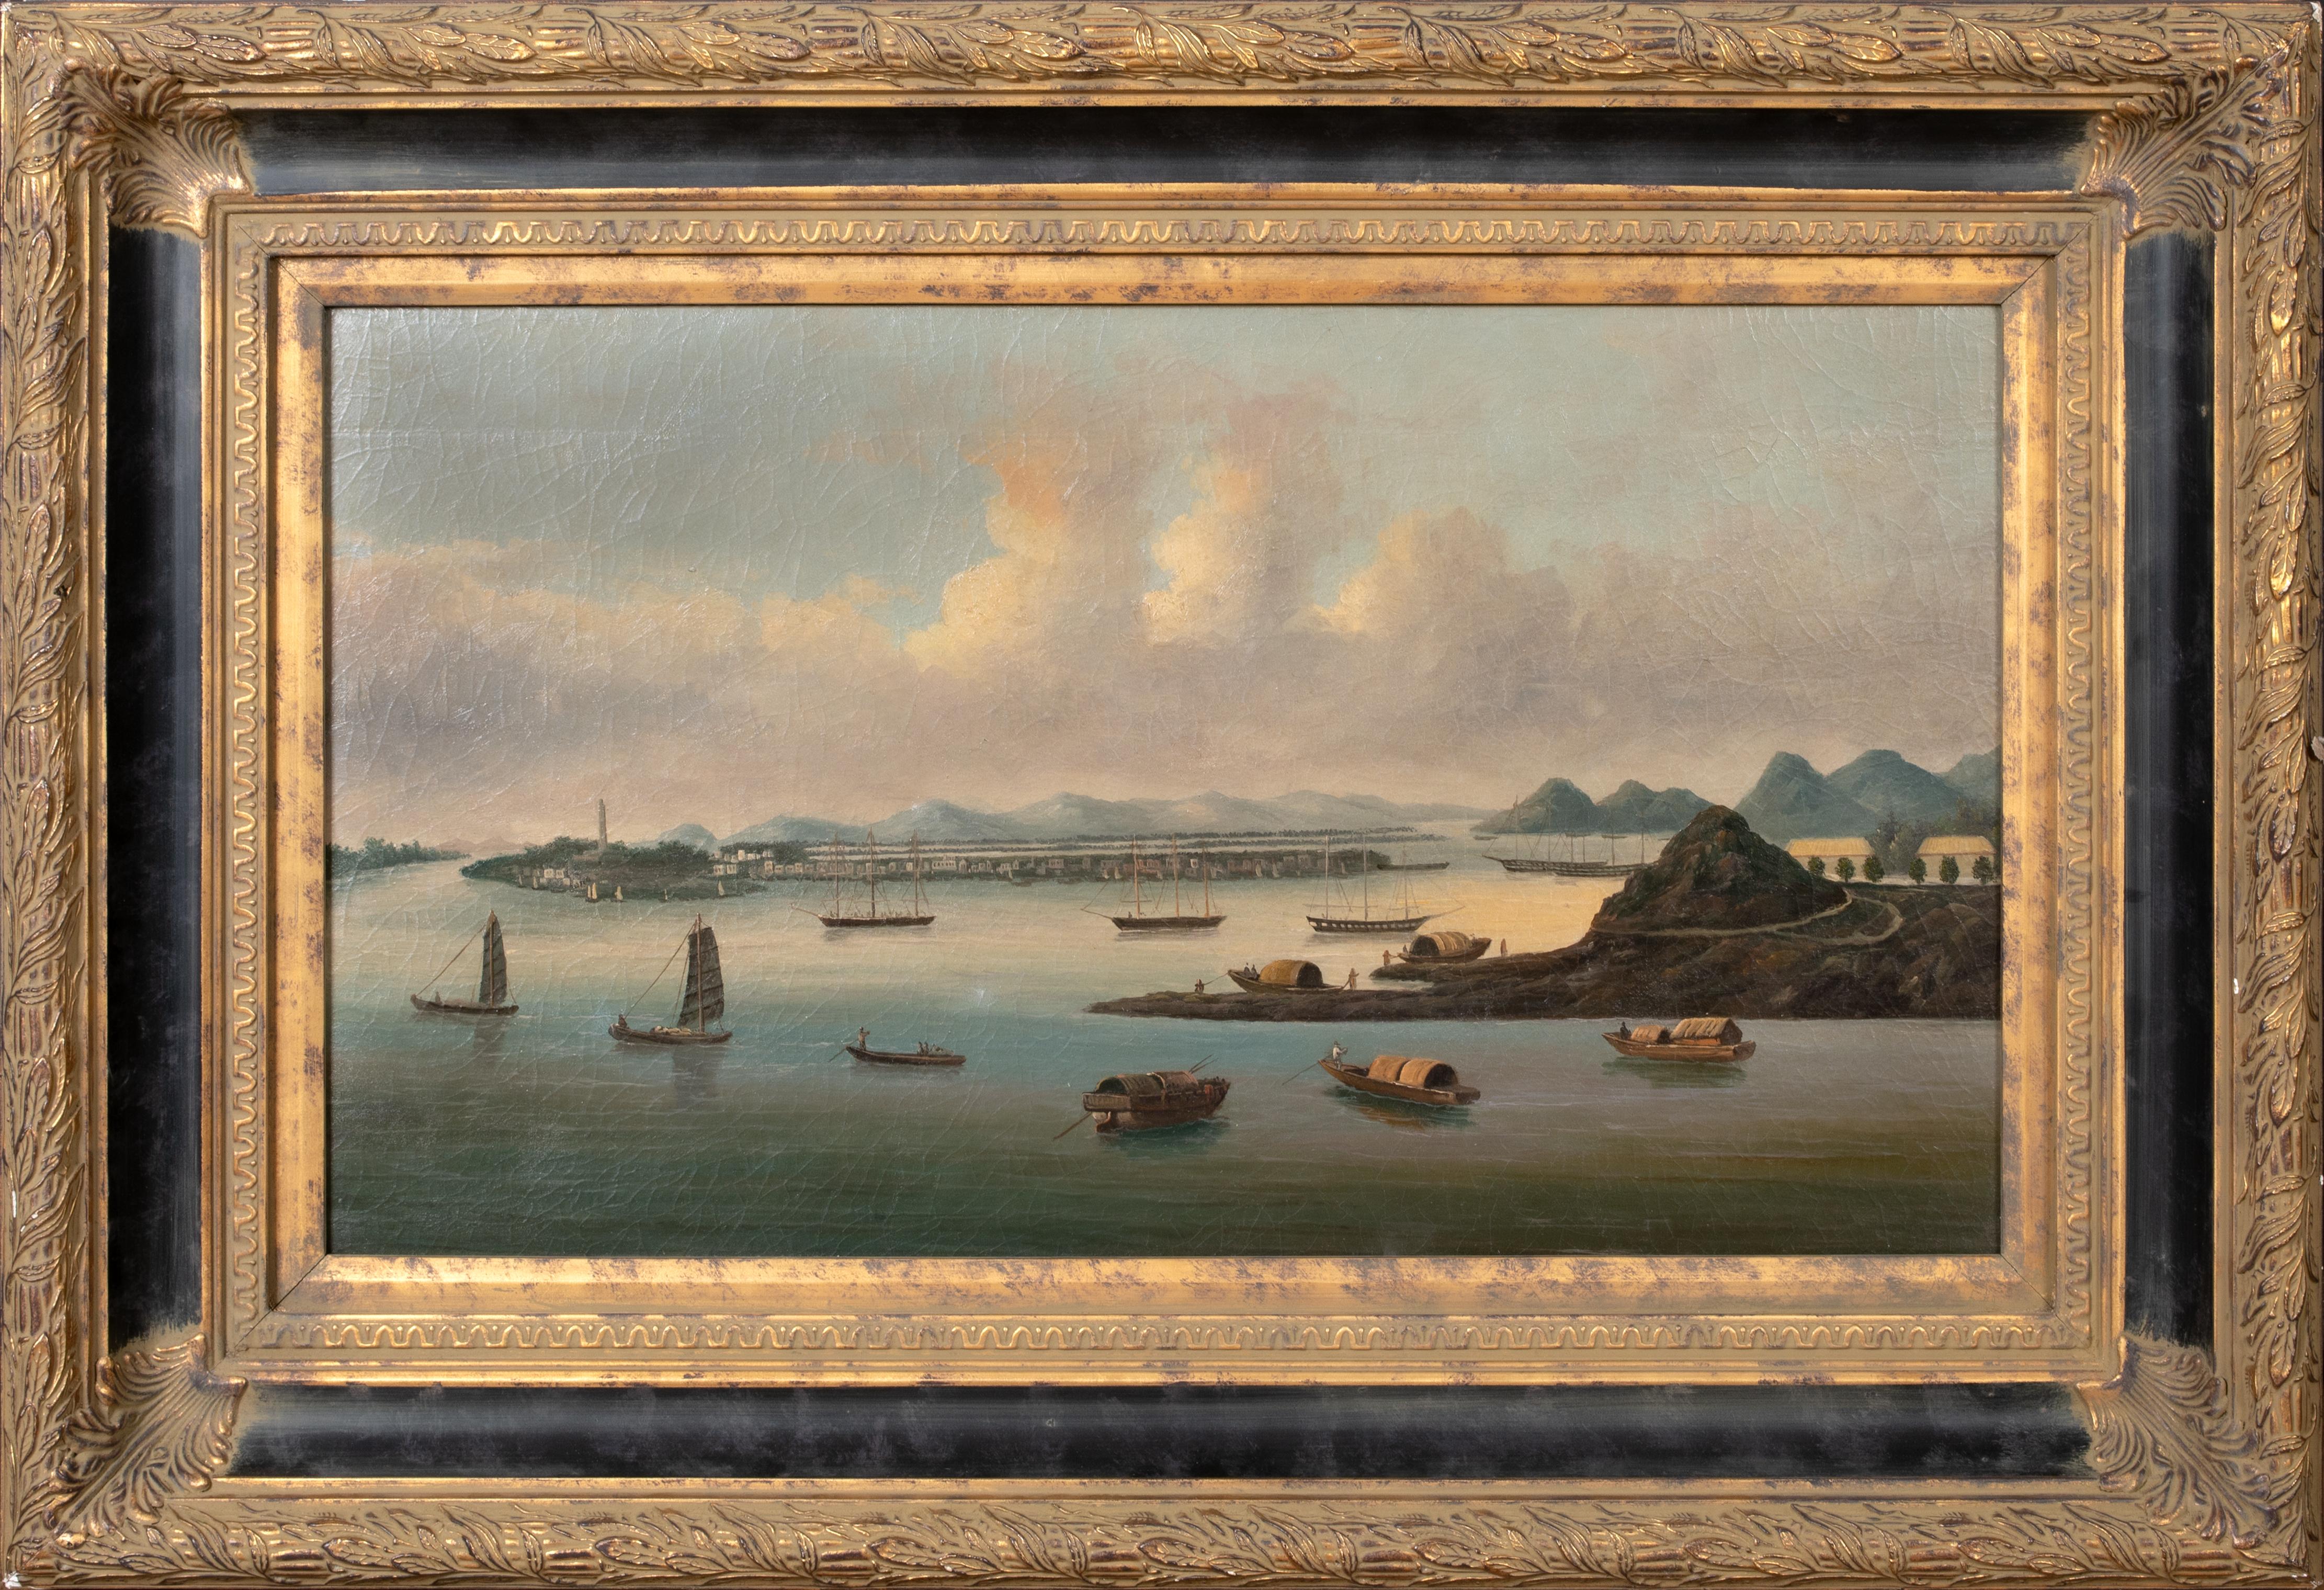 View Of Whampoa Anchorage China, 19th Century  Chinese Trade Export Port